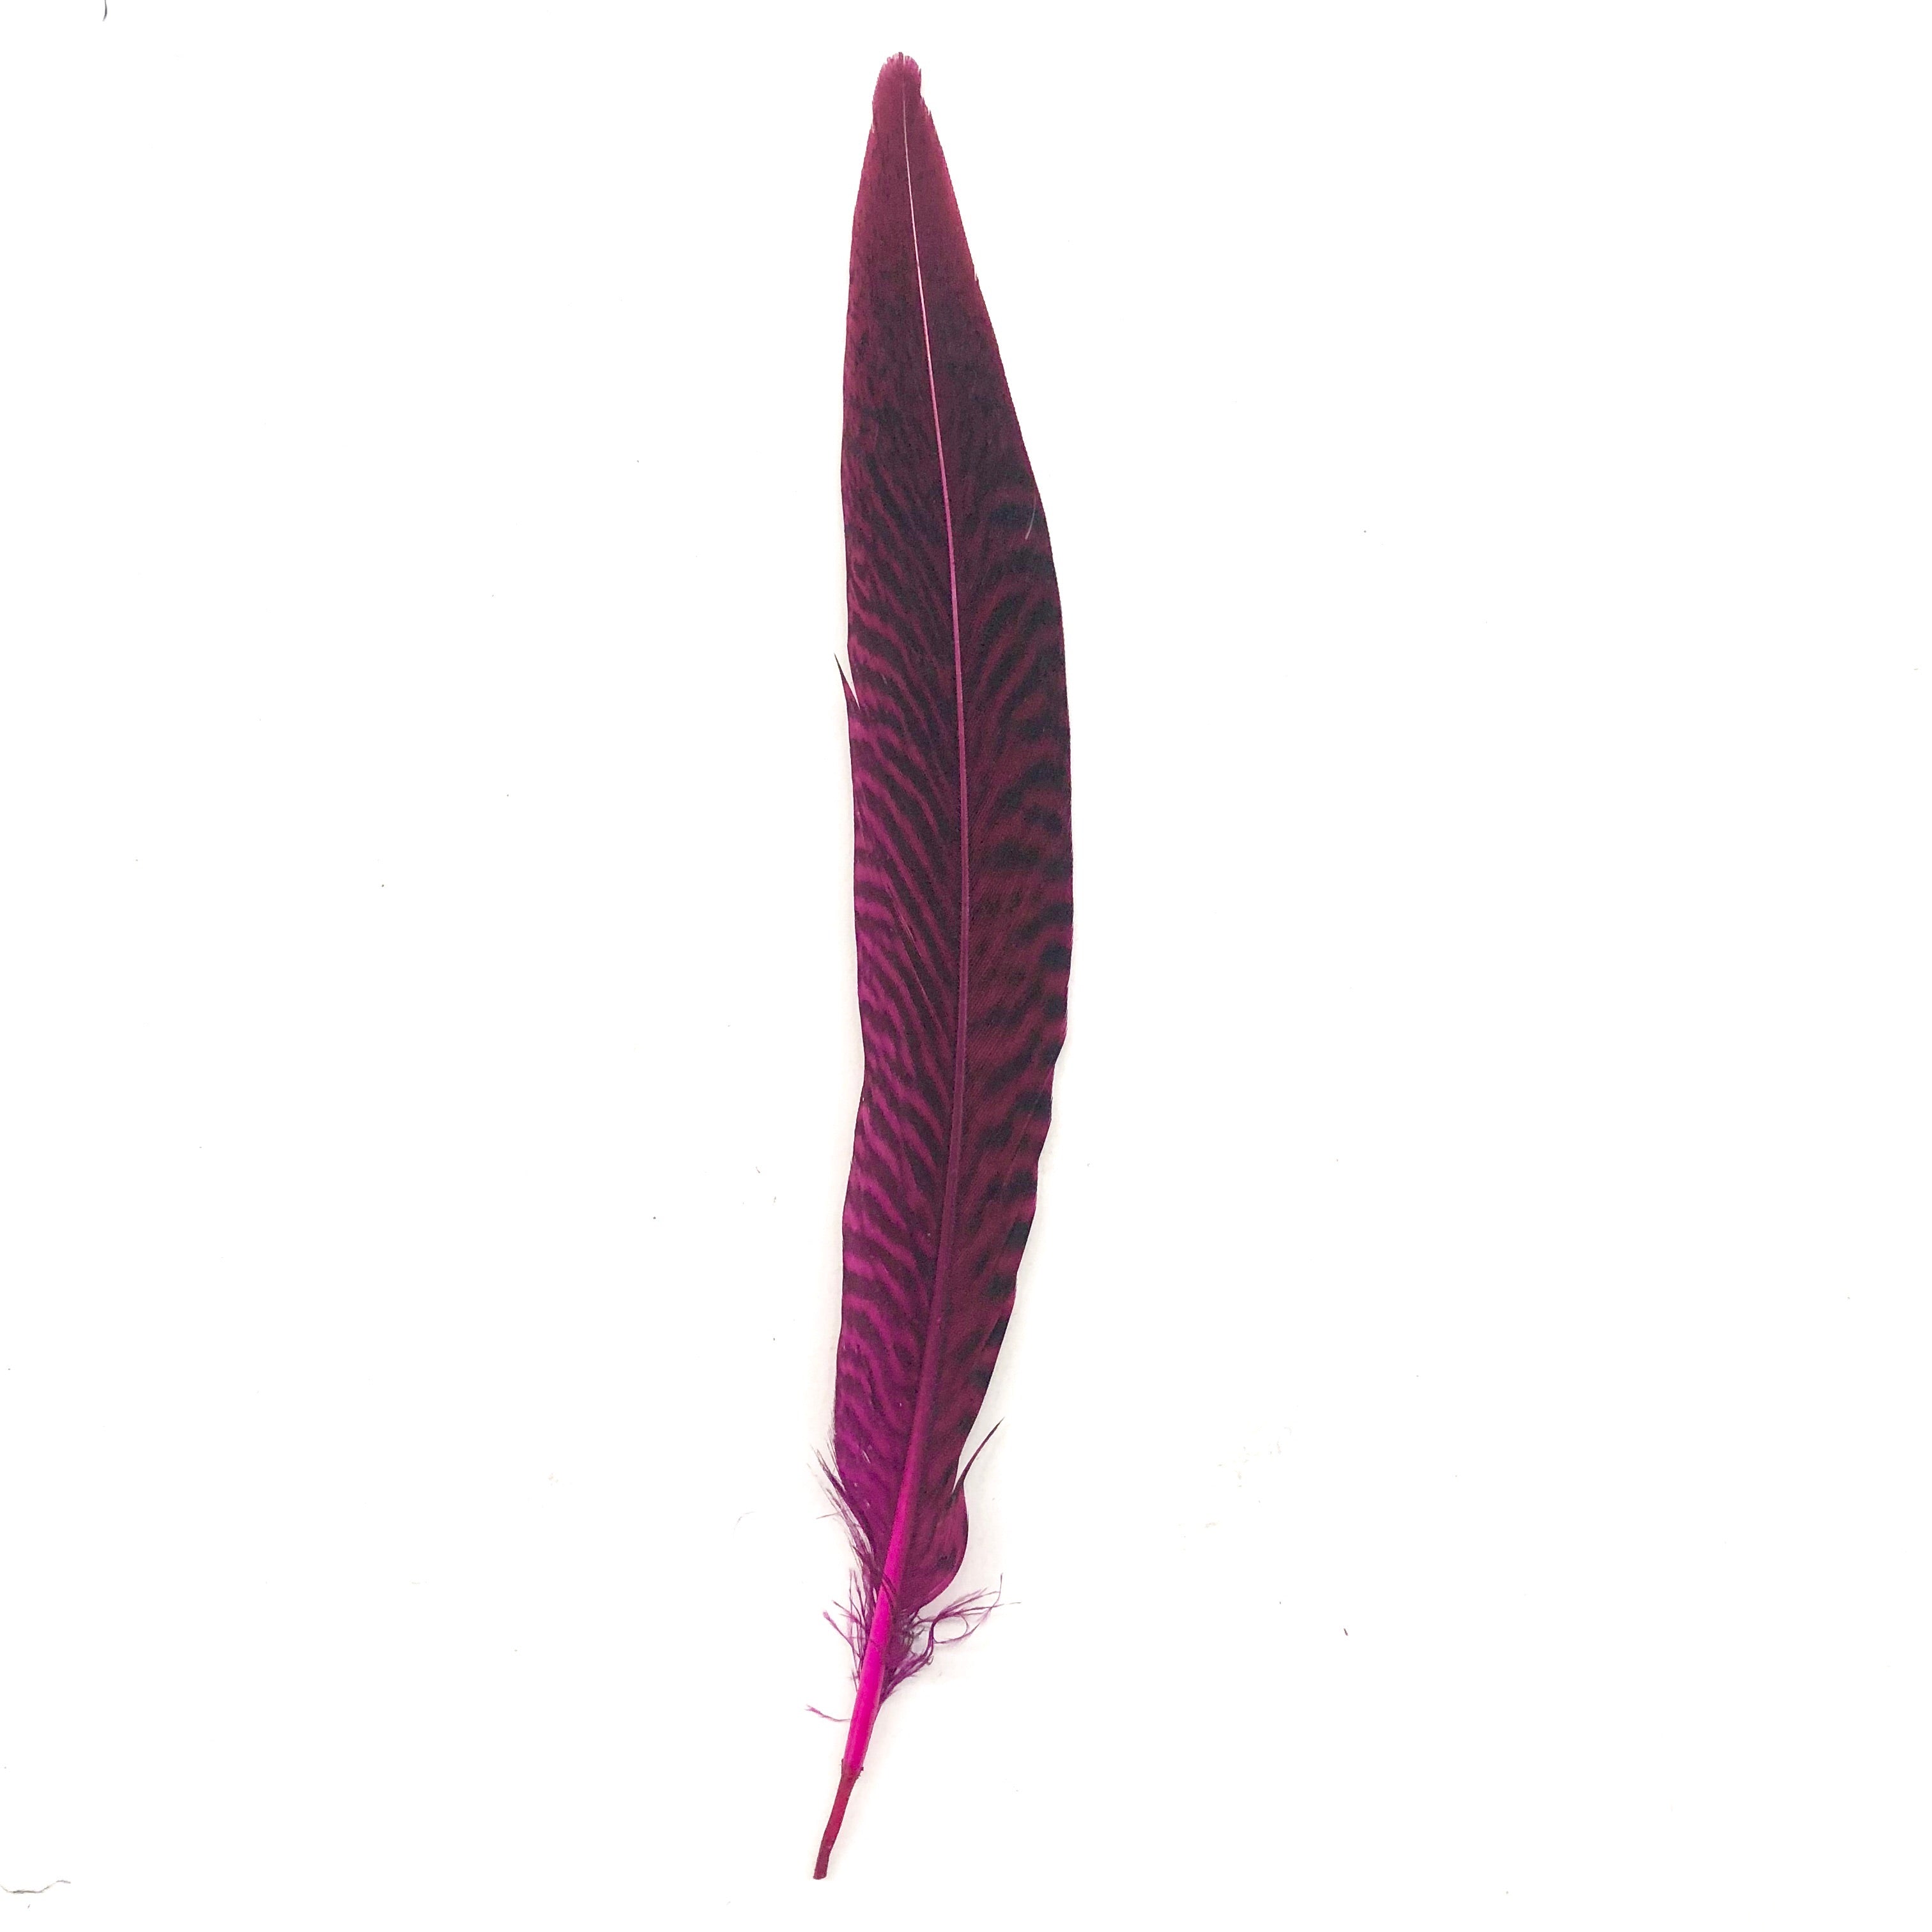 6" to 10" Golden Pheasant Side Tail Feather x 10 pcs - Cerise